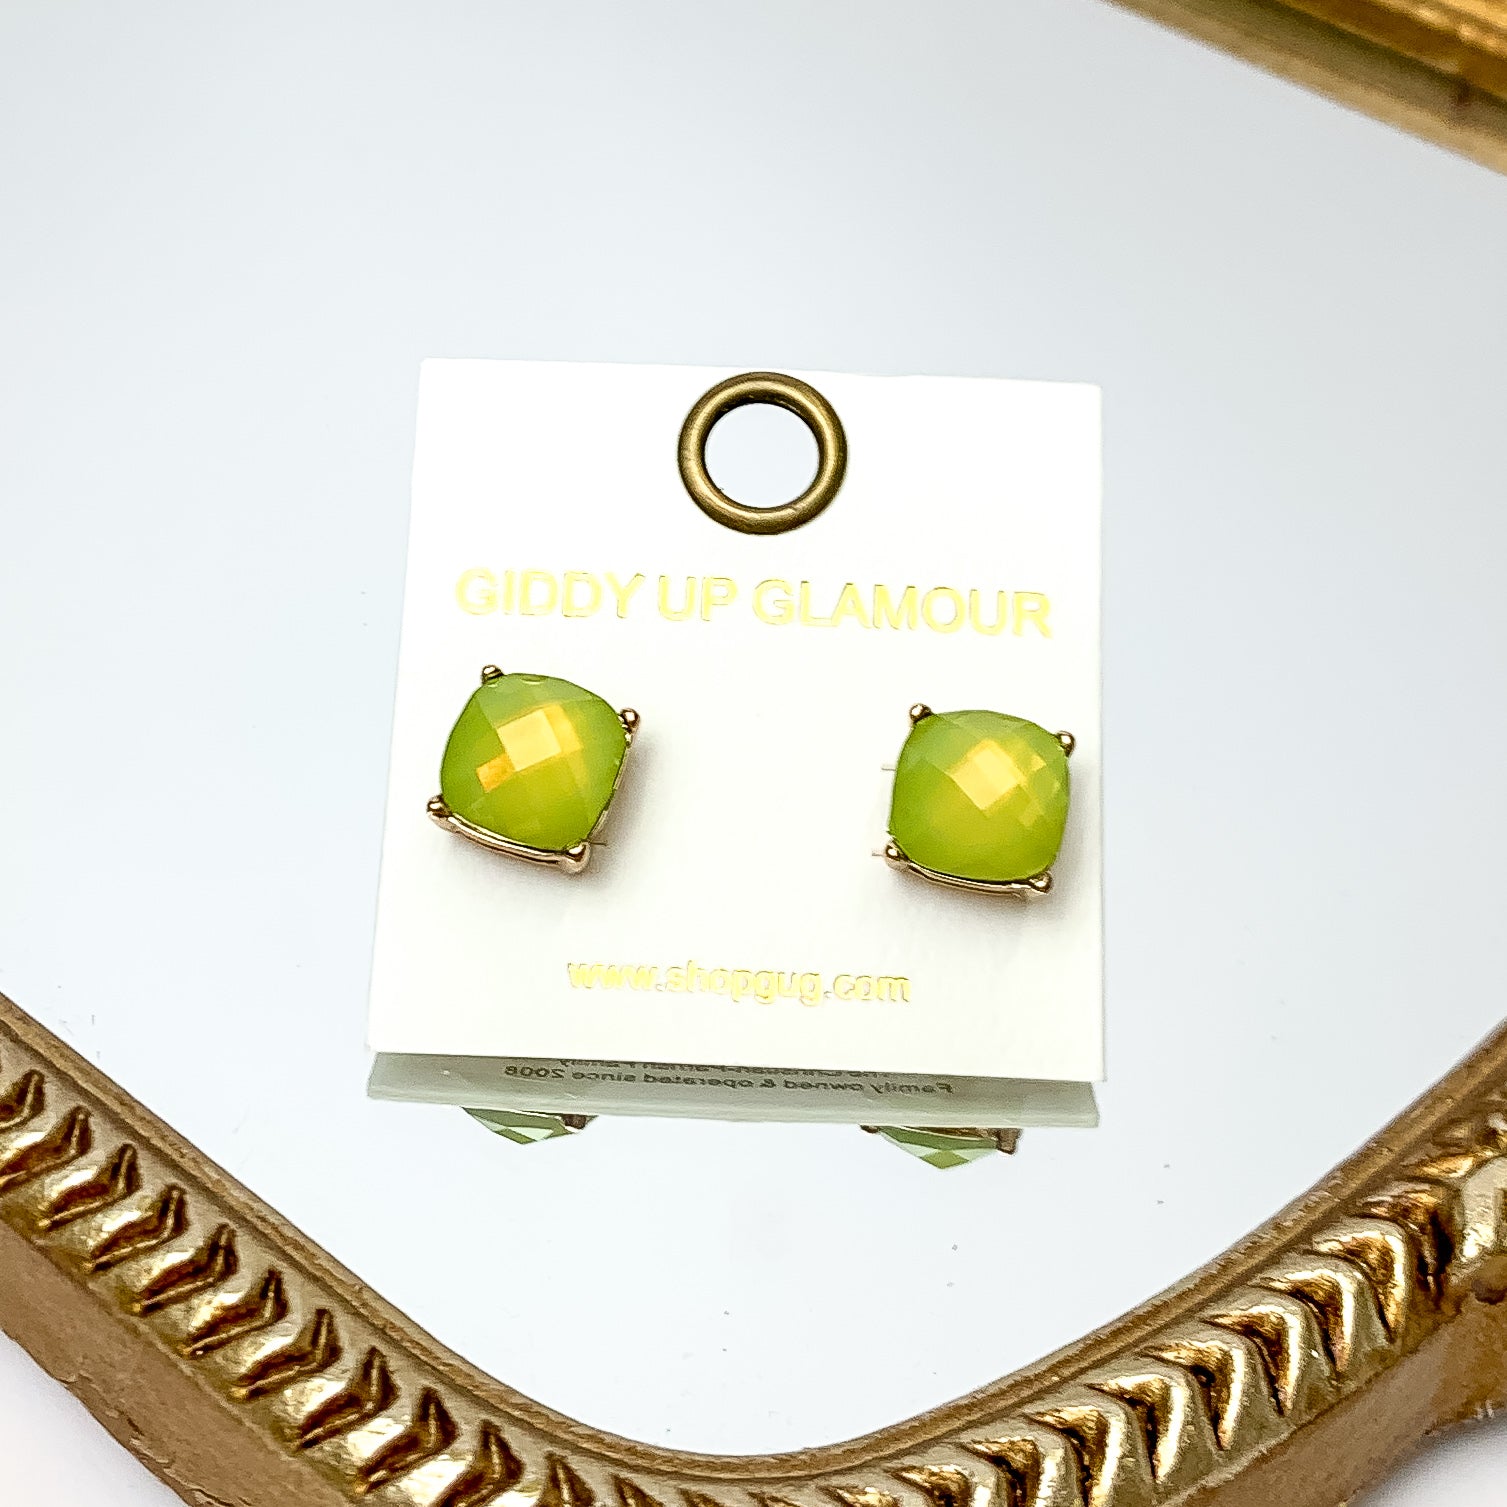 Large Crystal Stud Earrings in Light Green. These earrings are pictured laying on a gold trimmed mirror.